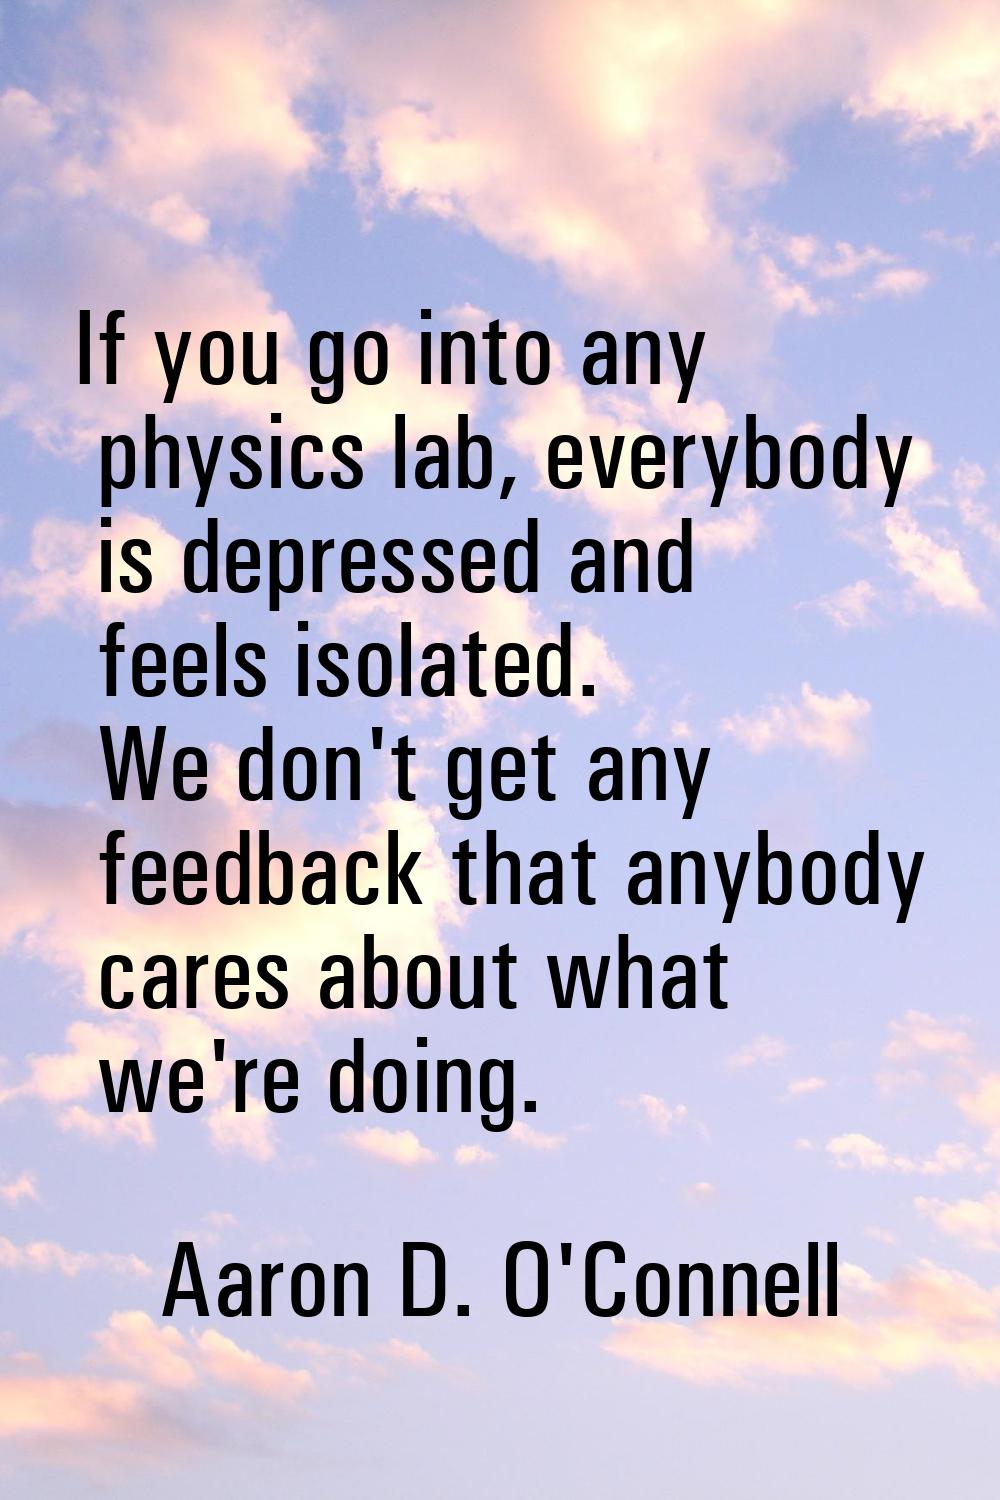 If you go into any physics lab, everybody is depressed and feels isolated. We don't get any feedbac